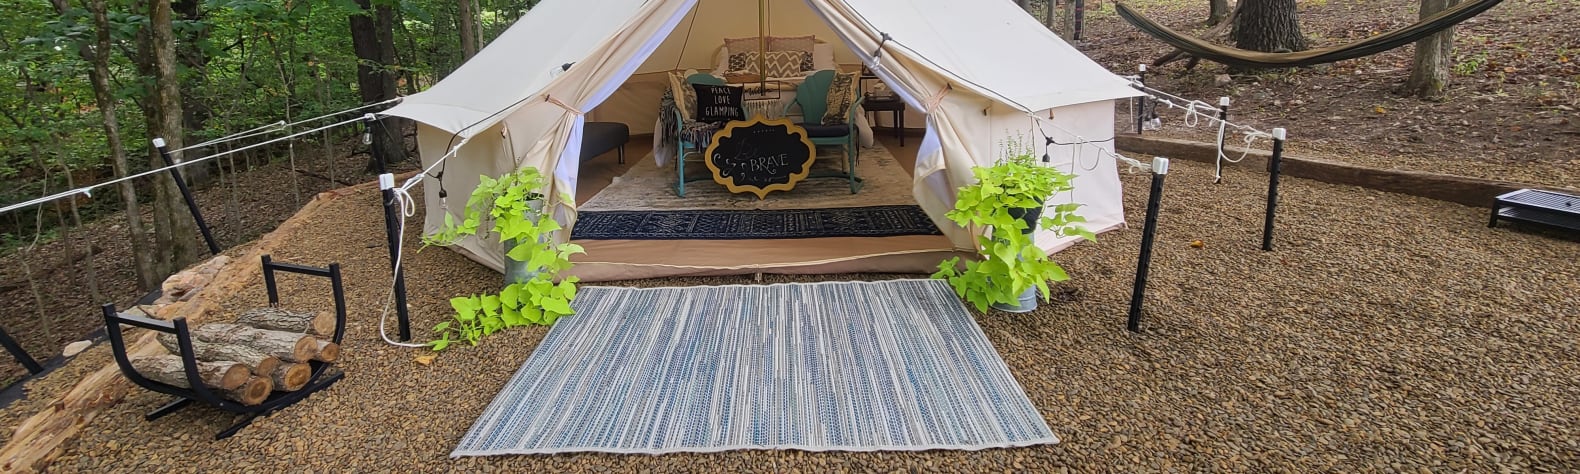 Lola's Lodge - Bell Tent